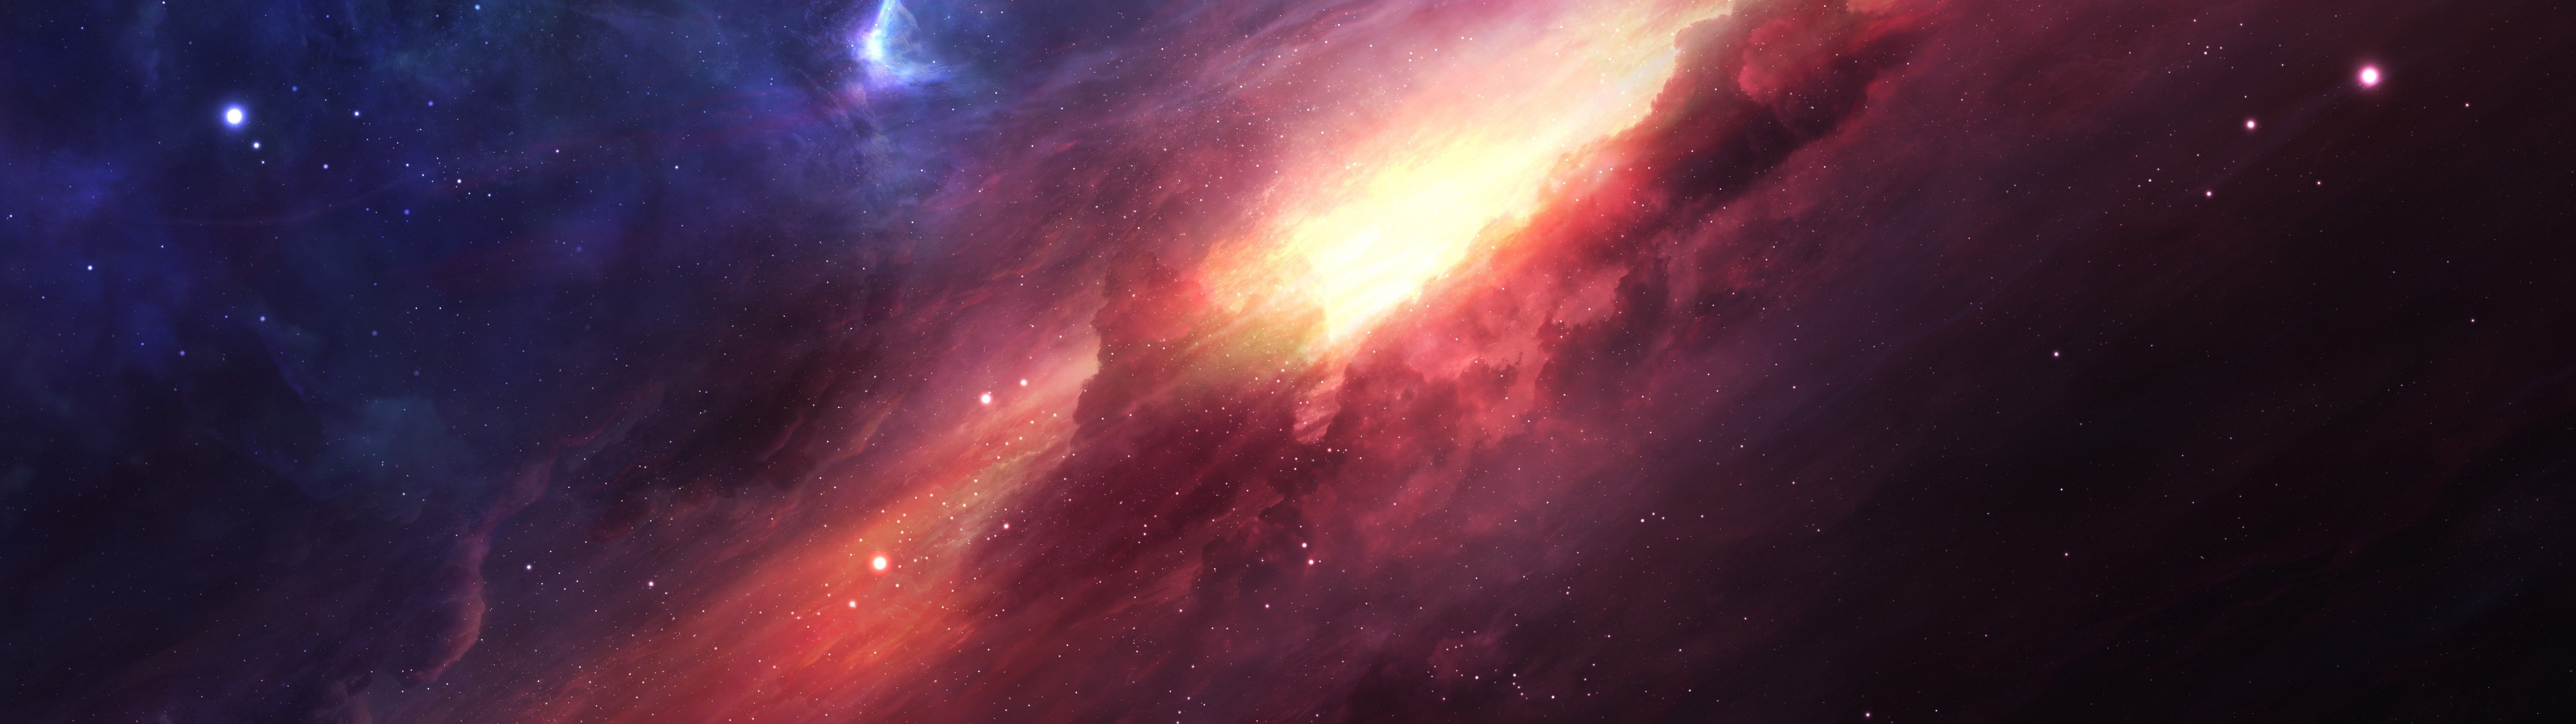 Download 7680x2160 Cosmos, Colorful Nebula, Orange Galaxy, Outer Space, Universe Wallpaper